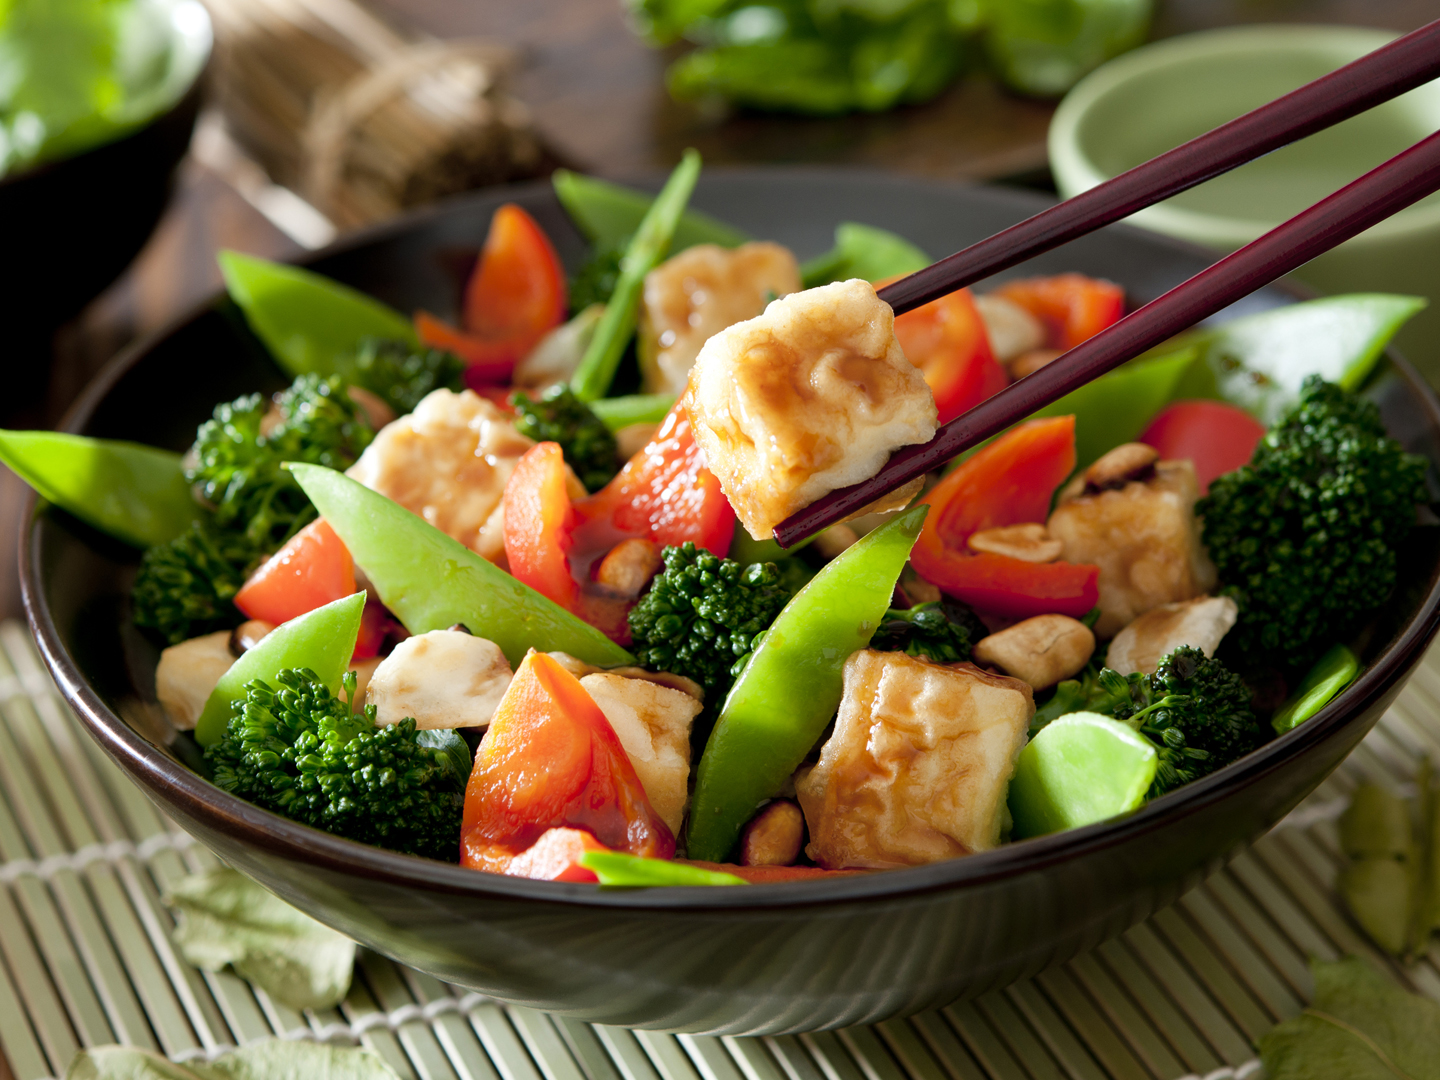 Don’t Freak Out, But We Can Guess Your Location Based on What You Eat vegetable stir fry